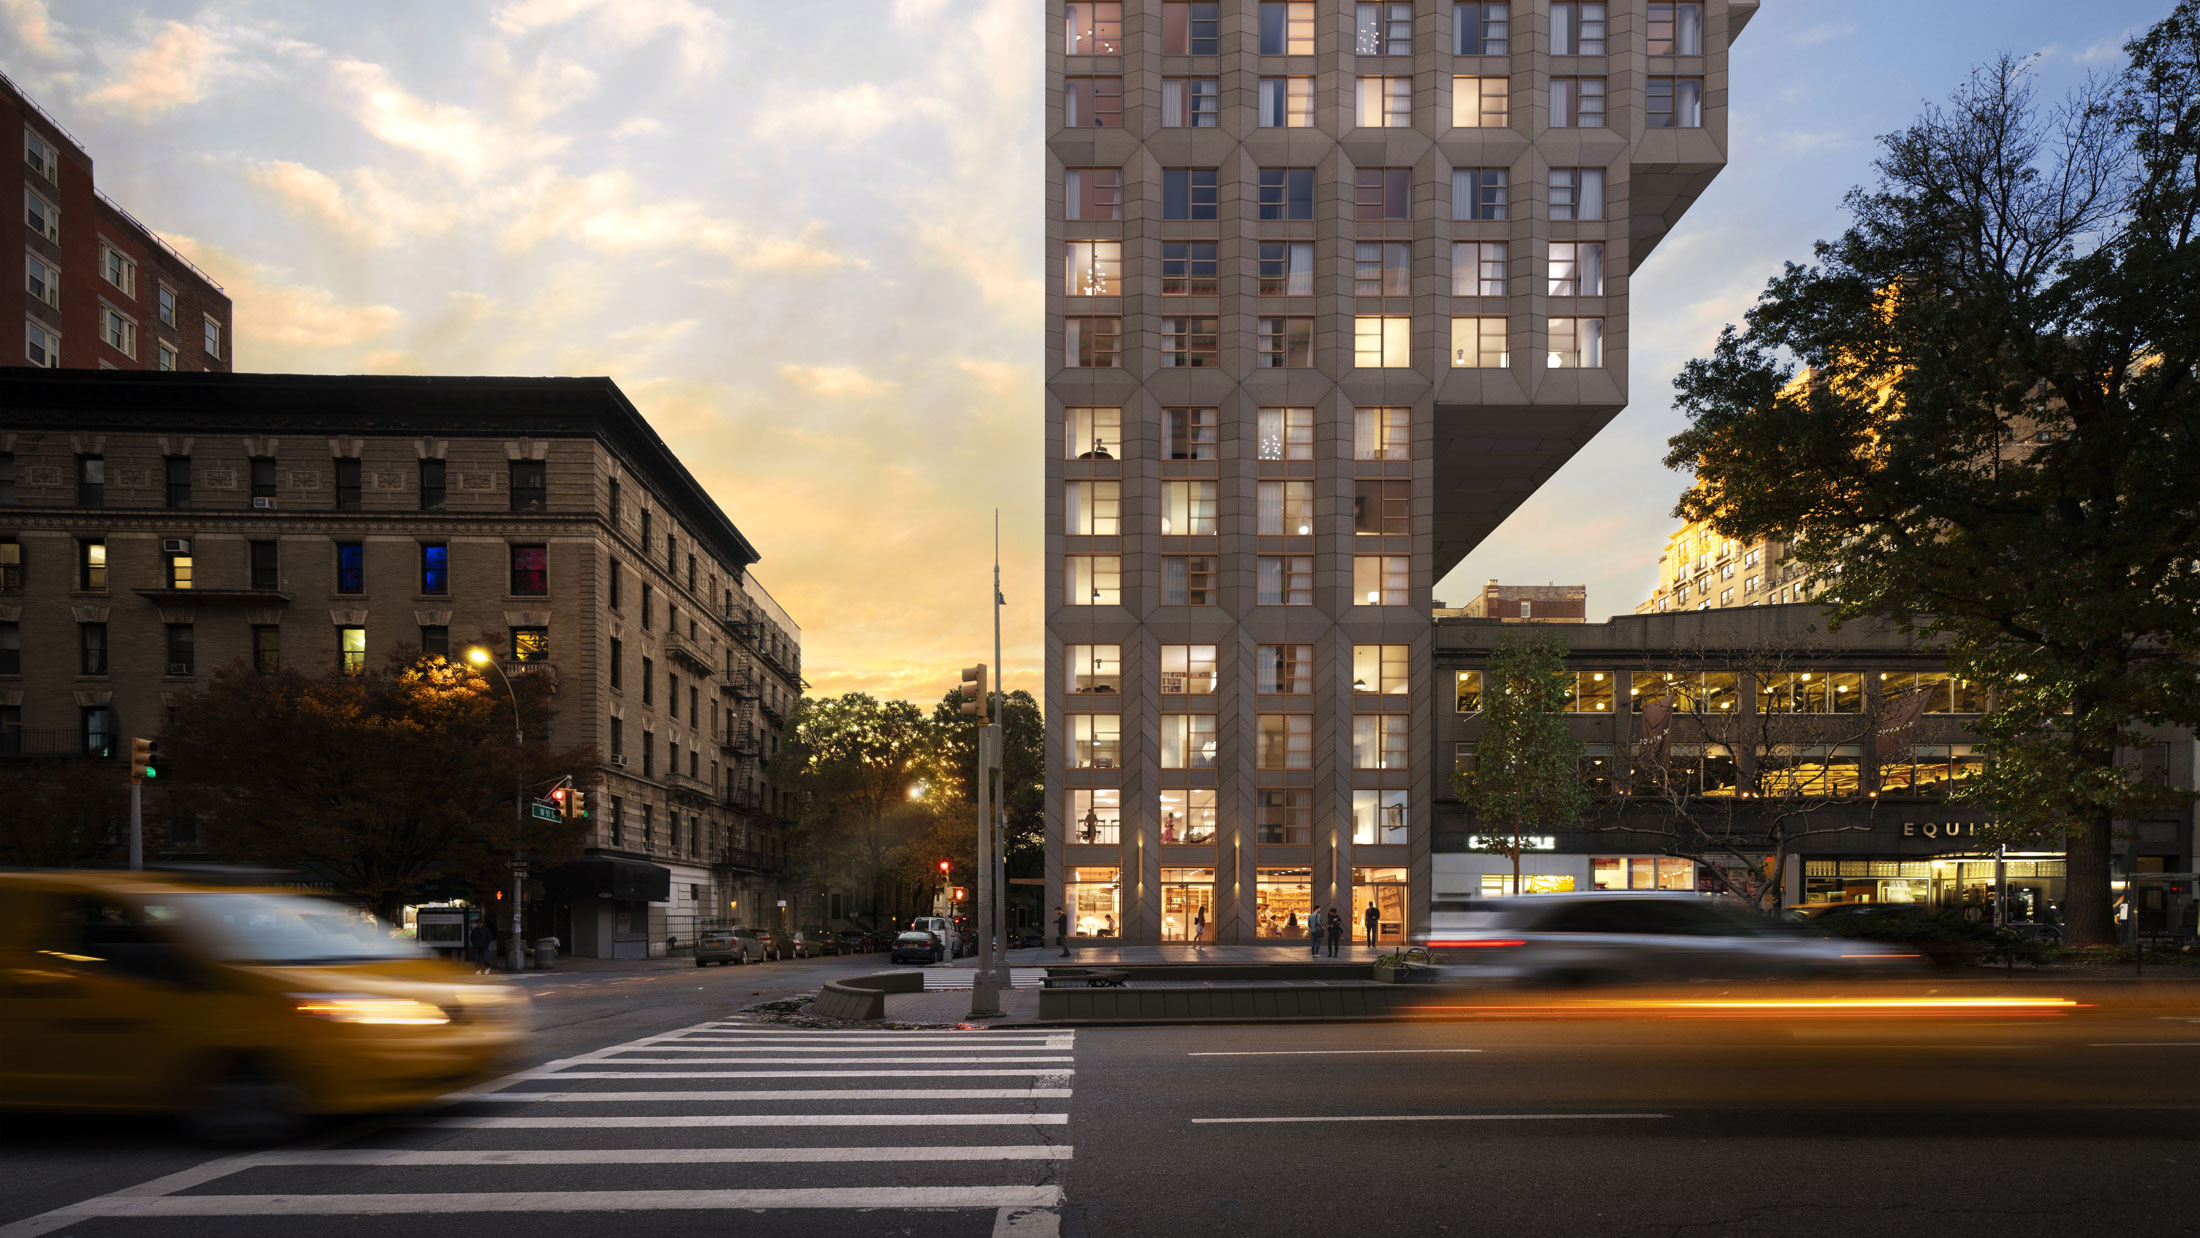 Architectural Rendering of the exterior of the ERA building project located on the Upper West Side in New York City